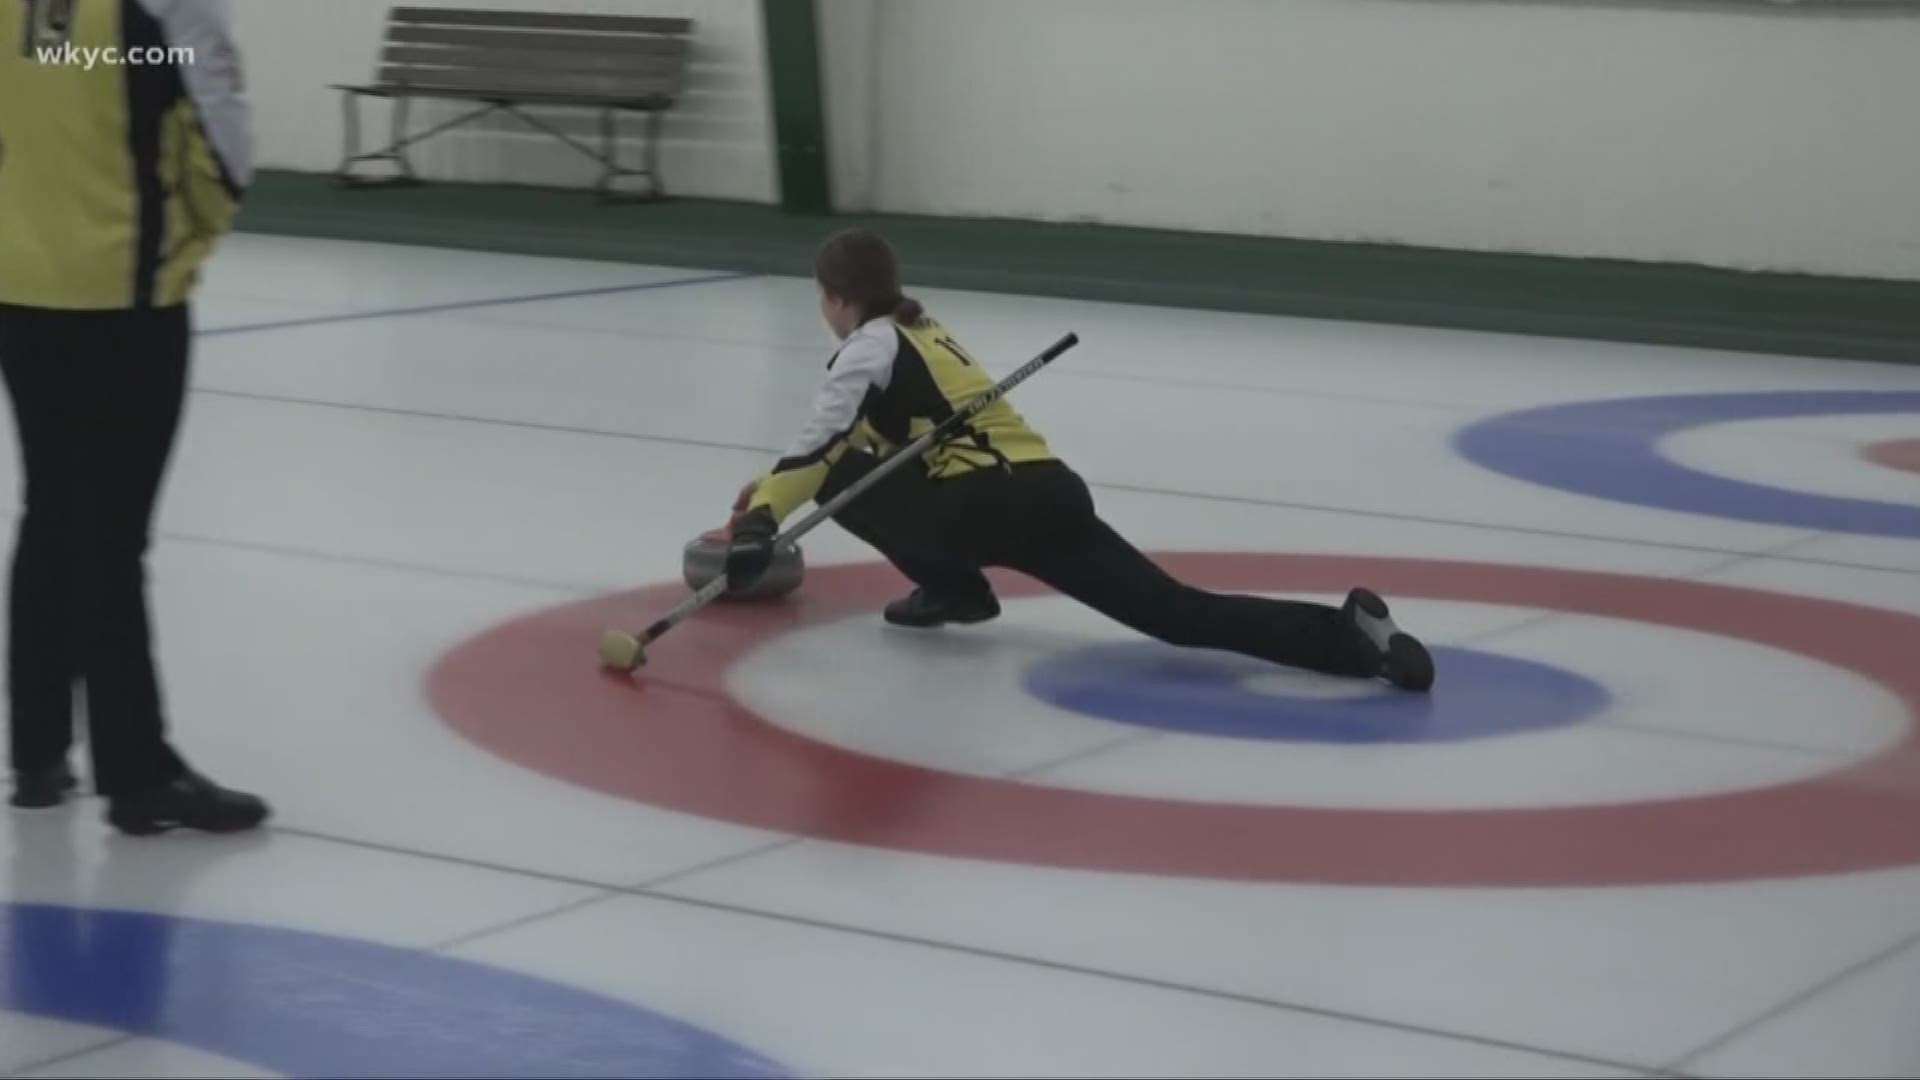 Local teen curlers prepare for national championship tournament